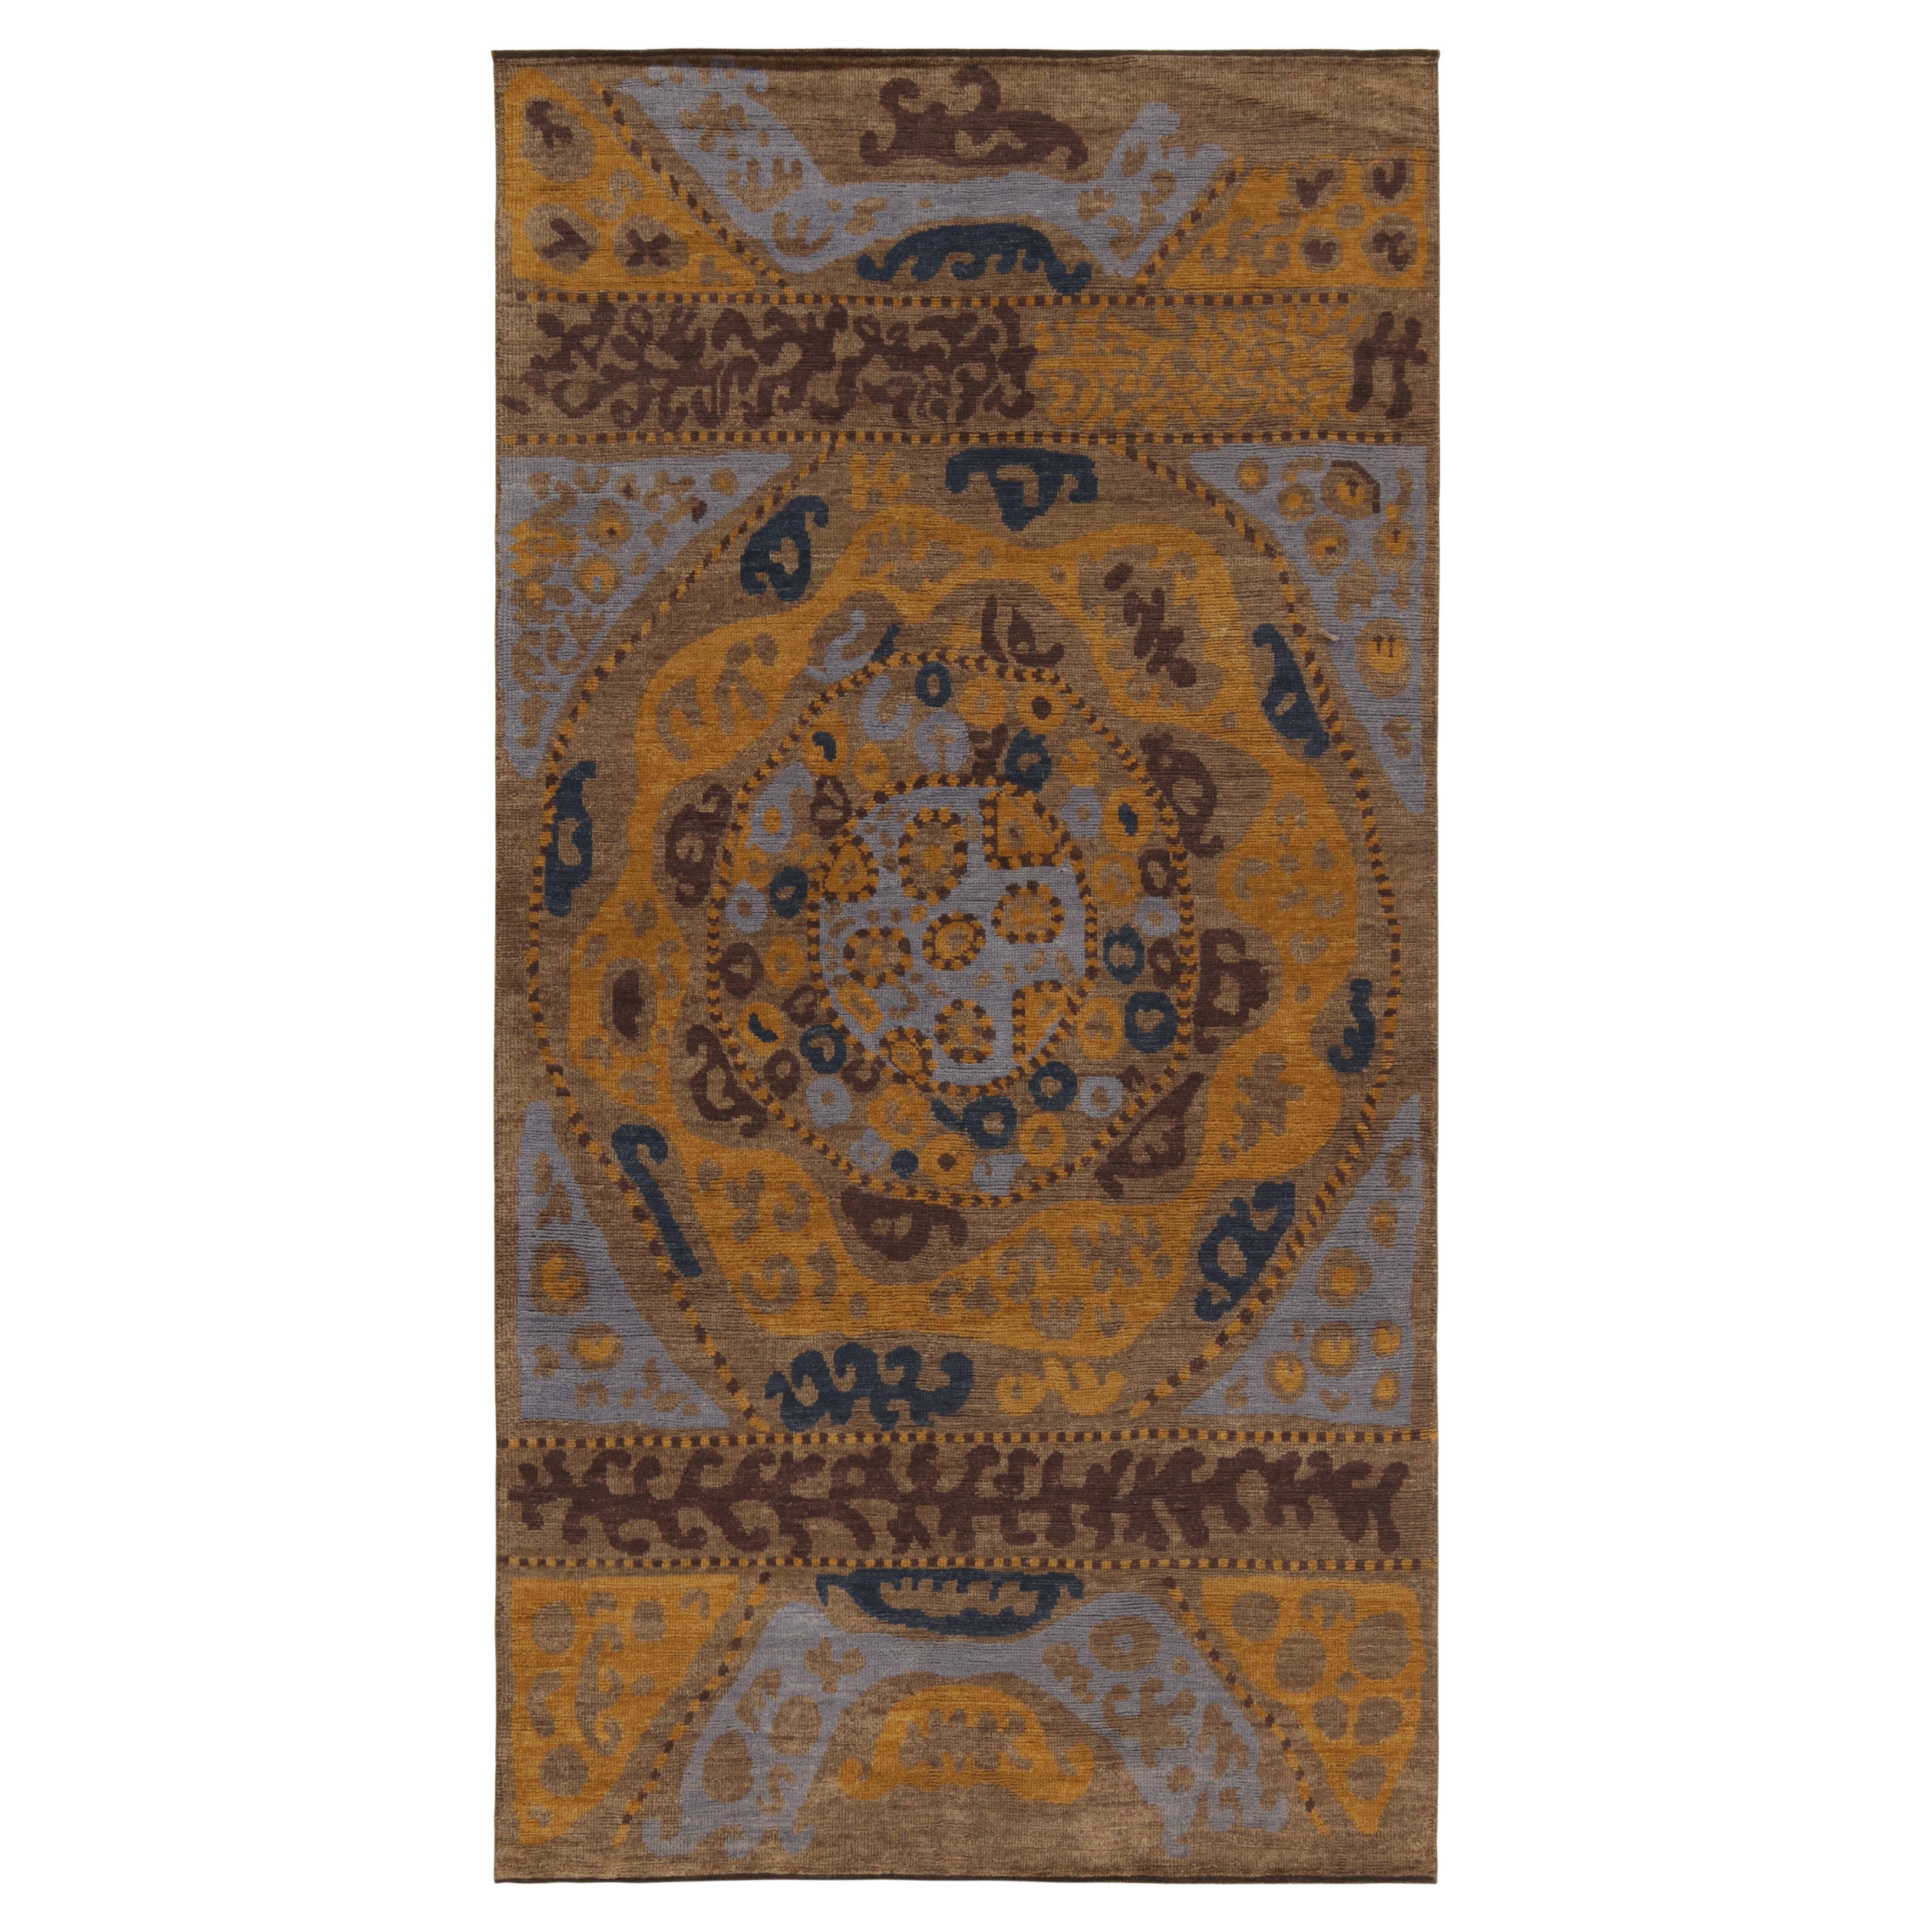 Rug & Kilim’s Tribal style rug in Beige-Brown, Gold and Blue Patterns